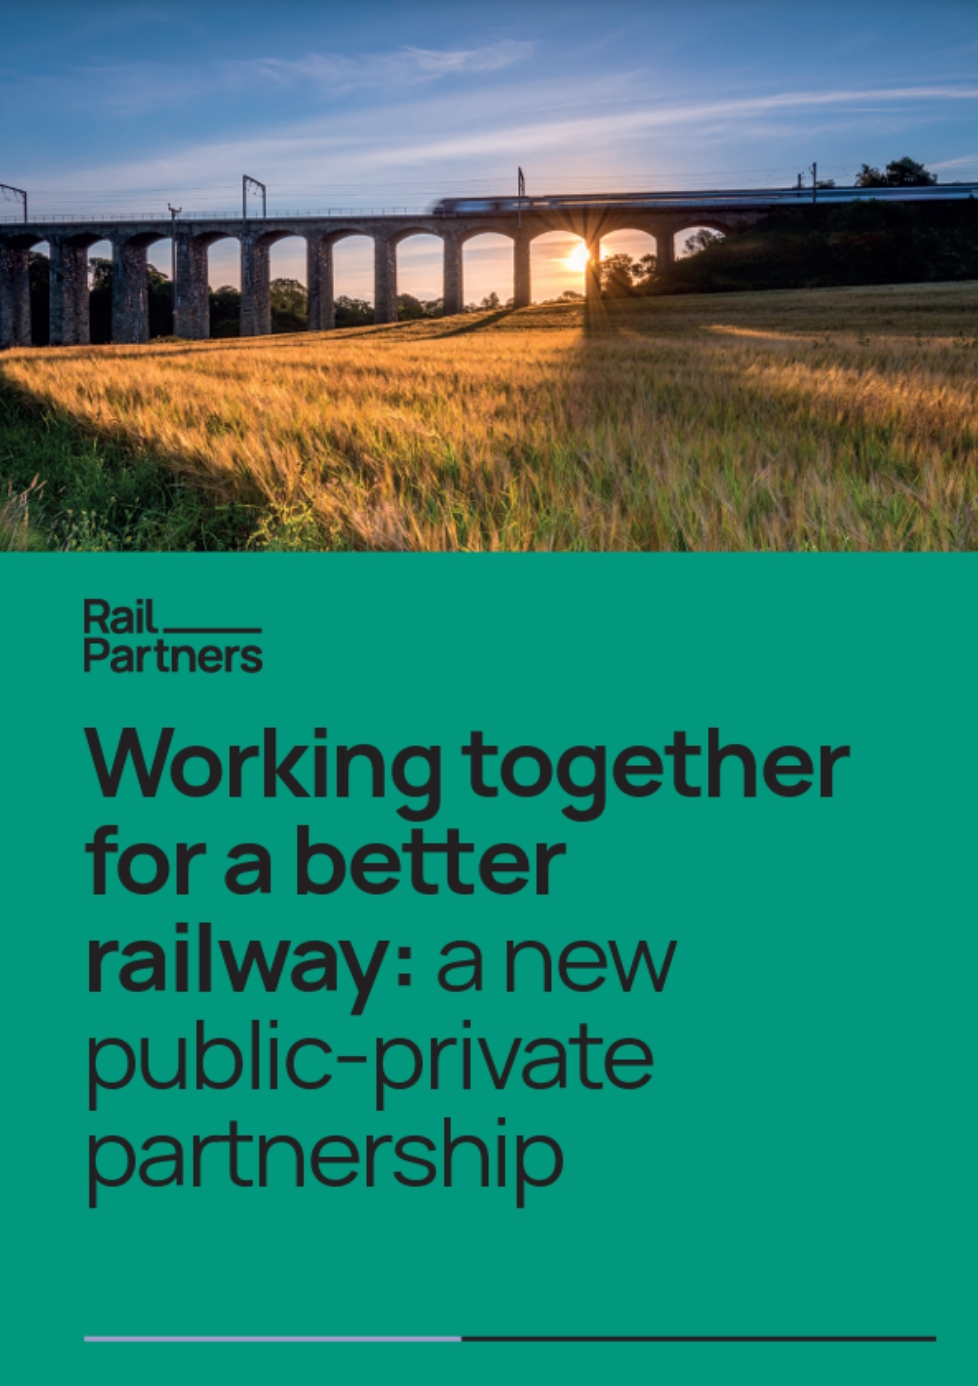 Working together for a better railway -  Rail Partners prospectus cover